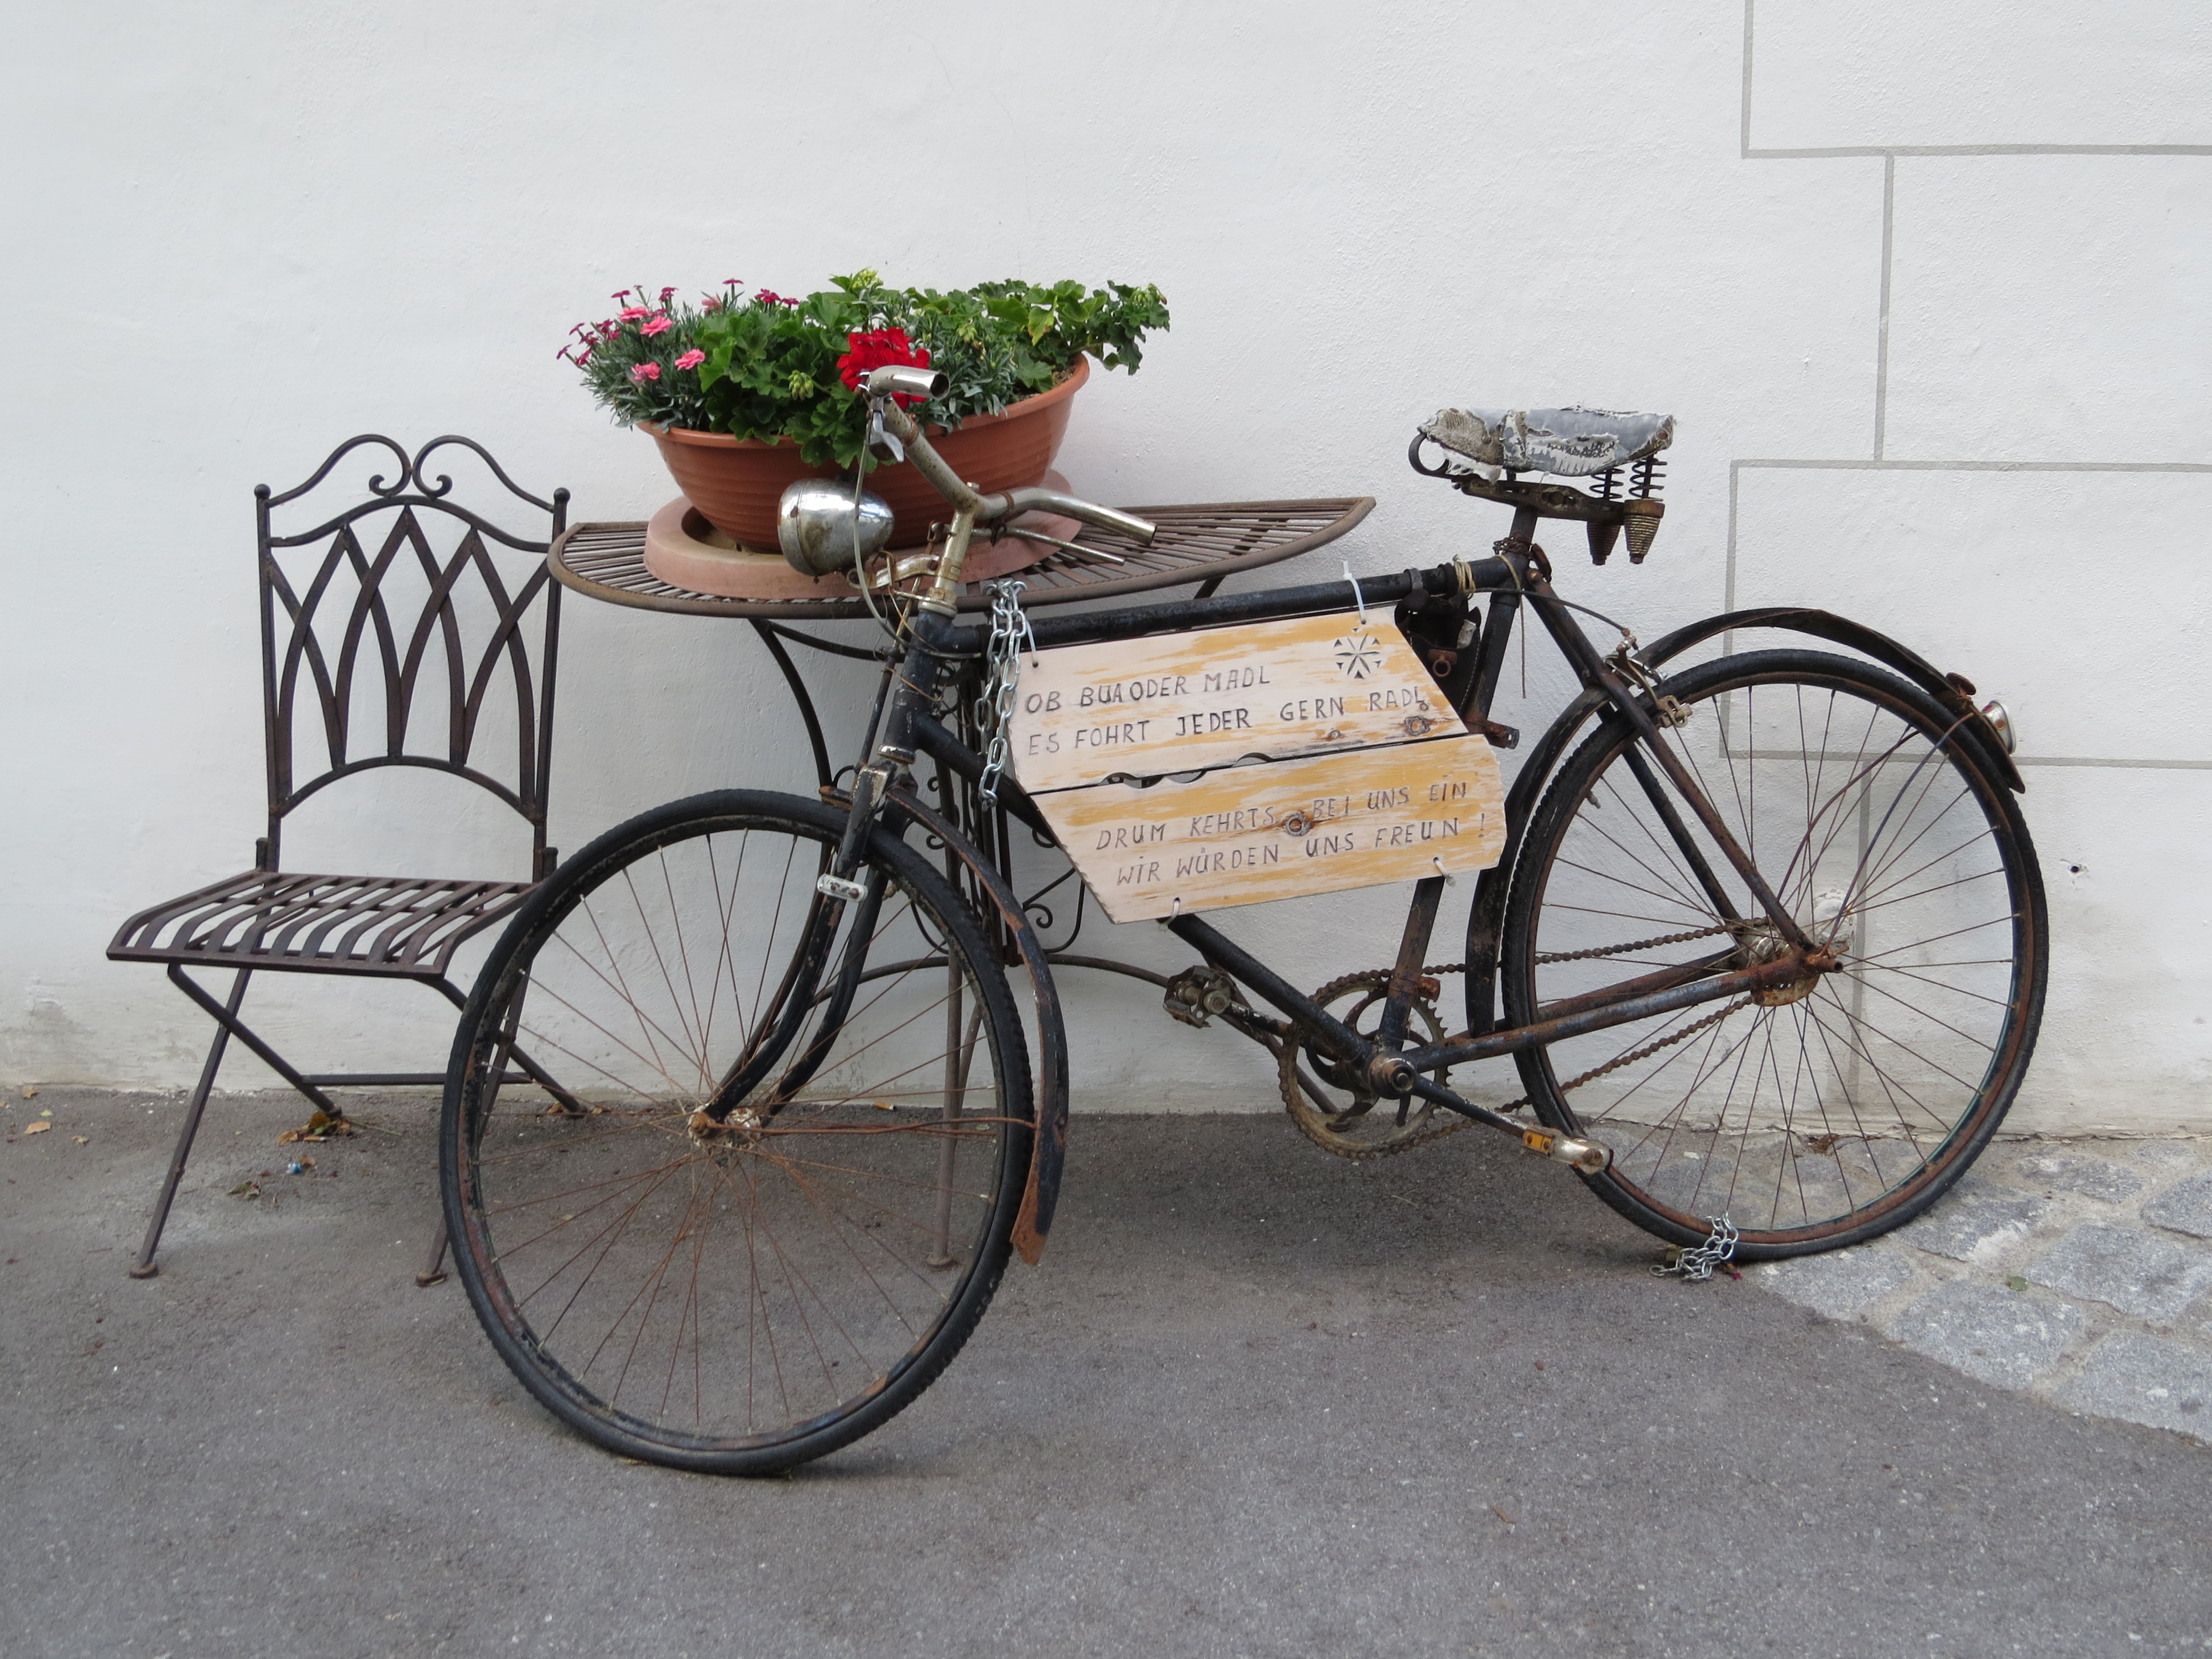 2018-08-16 (707) Old bicycle in Pfunds, Tyrol, Austria